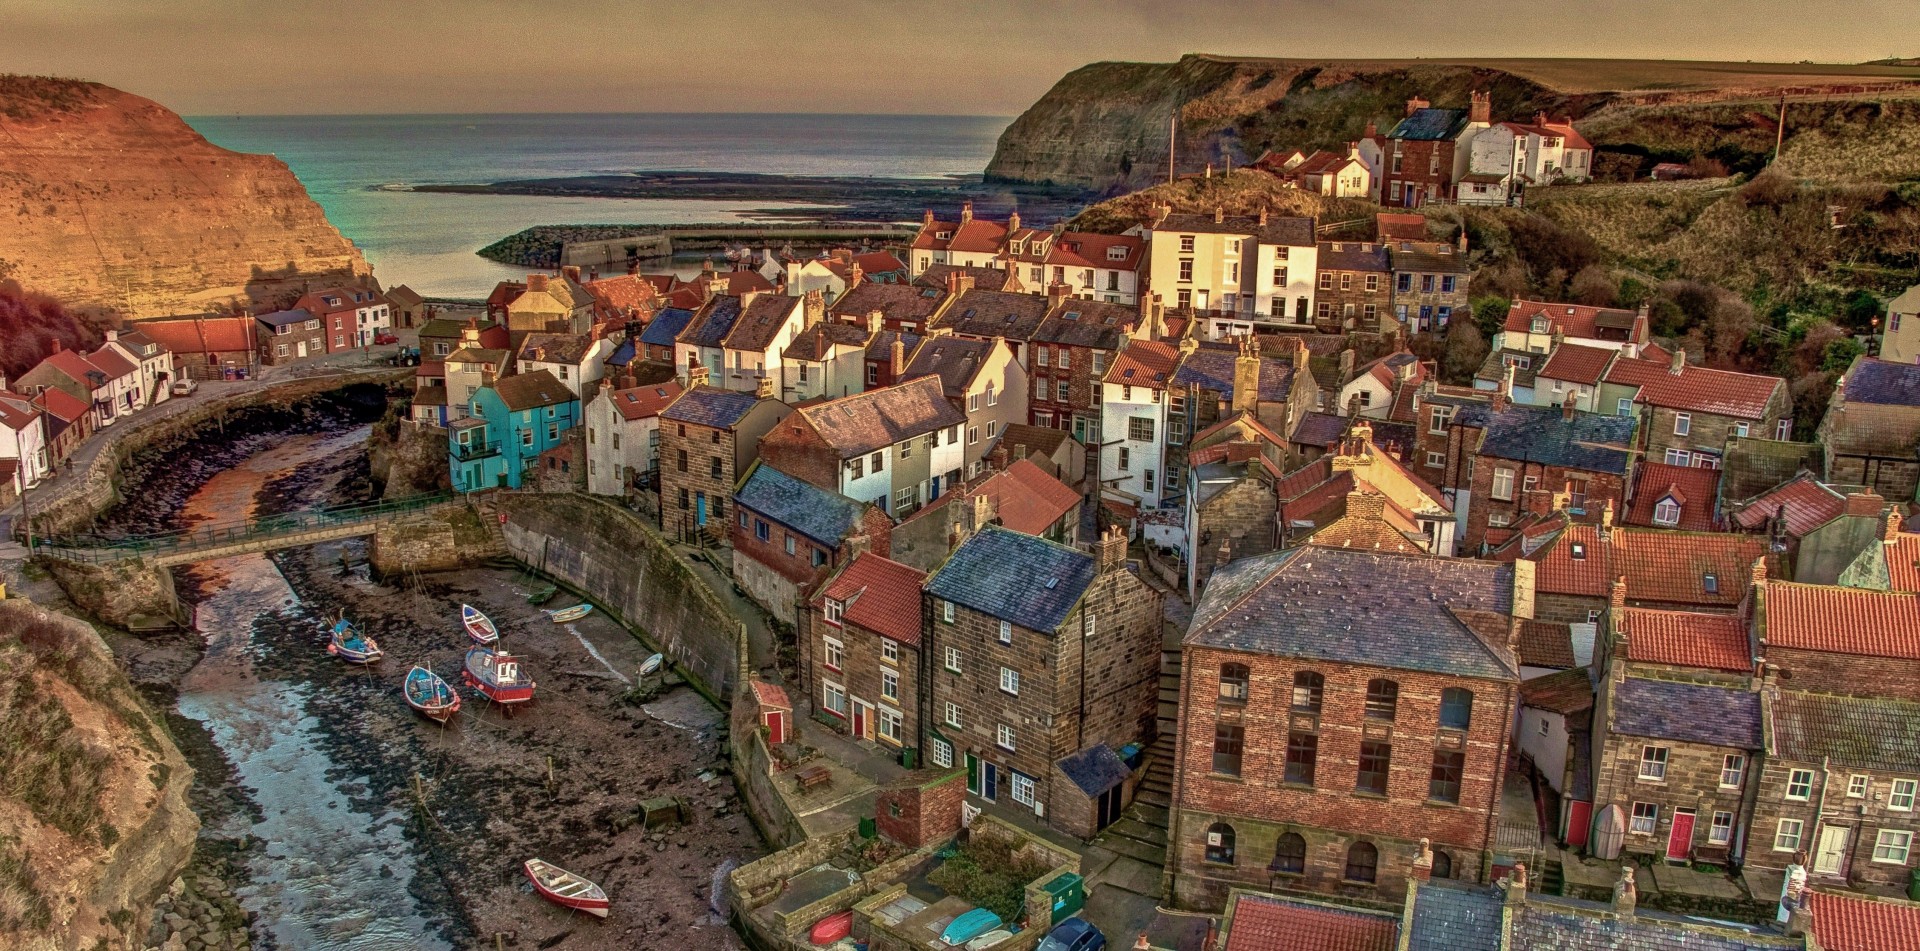 The fishing community of Staithes on the North Yorkshire Coast . Taken at sunset and enhanced with HDR .